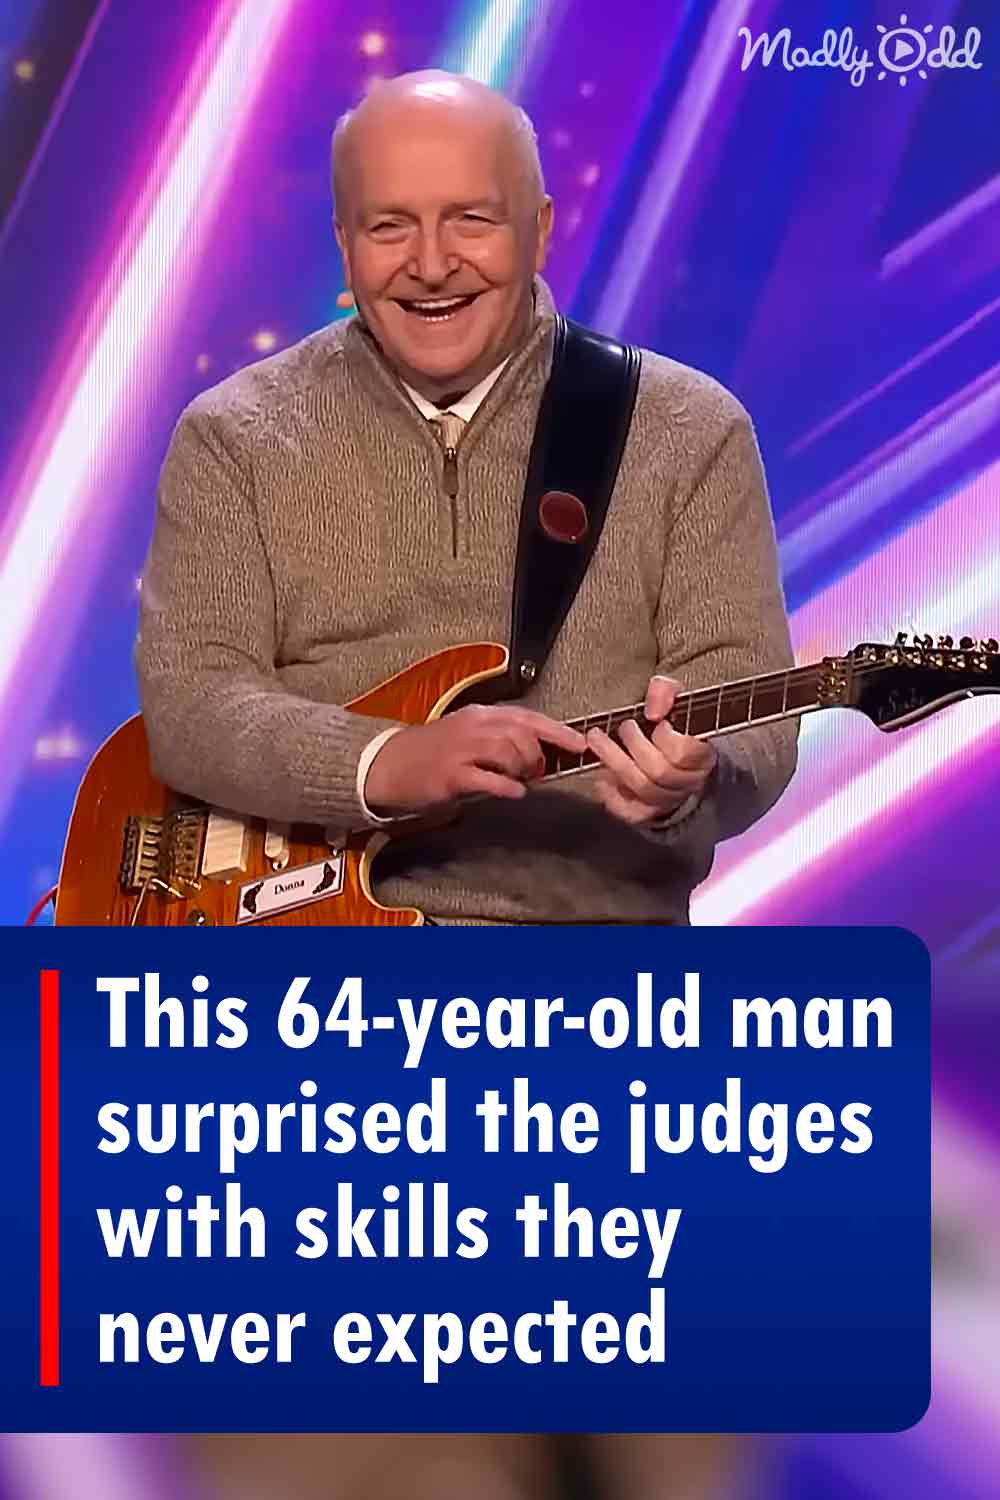 This 64-year-old man surprised the judges with skills they never expected